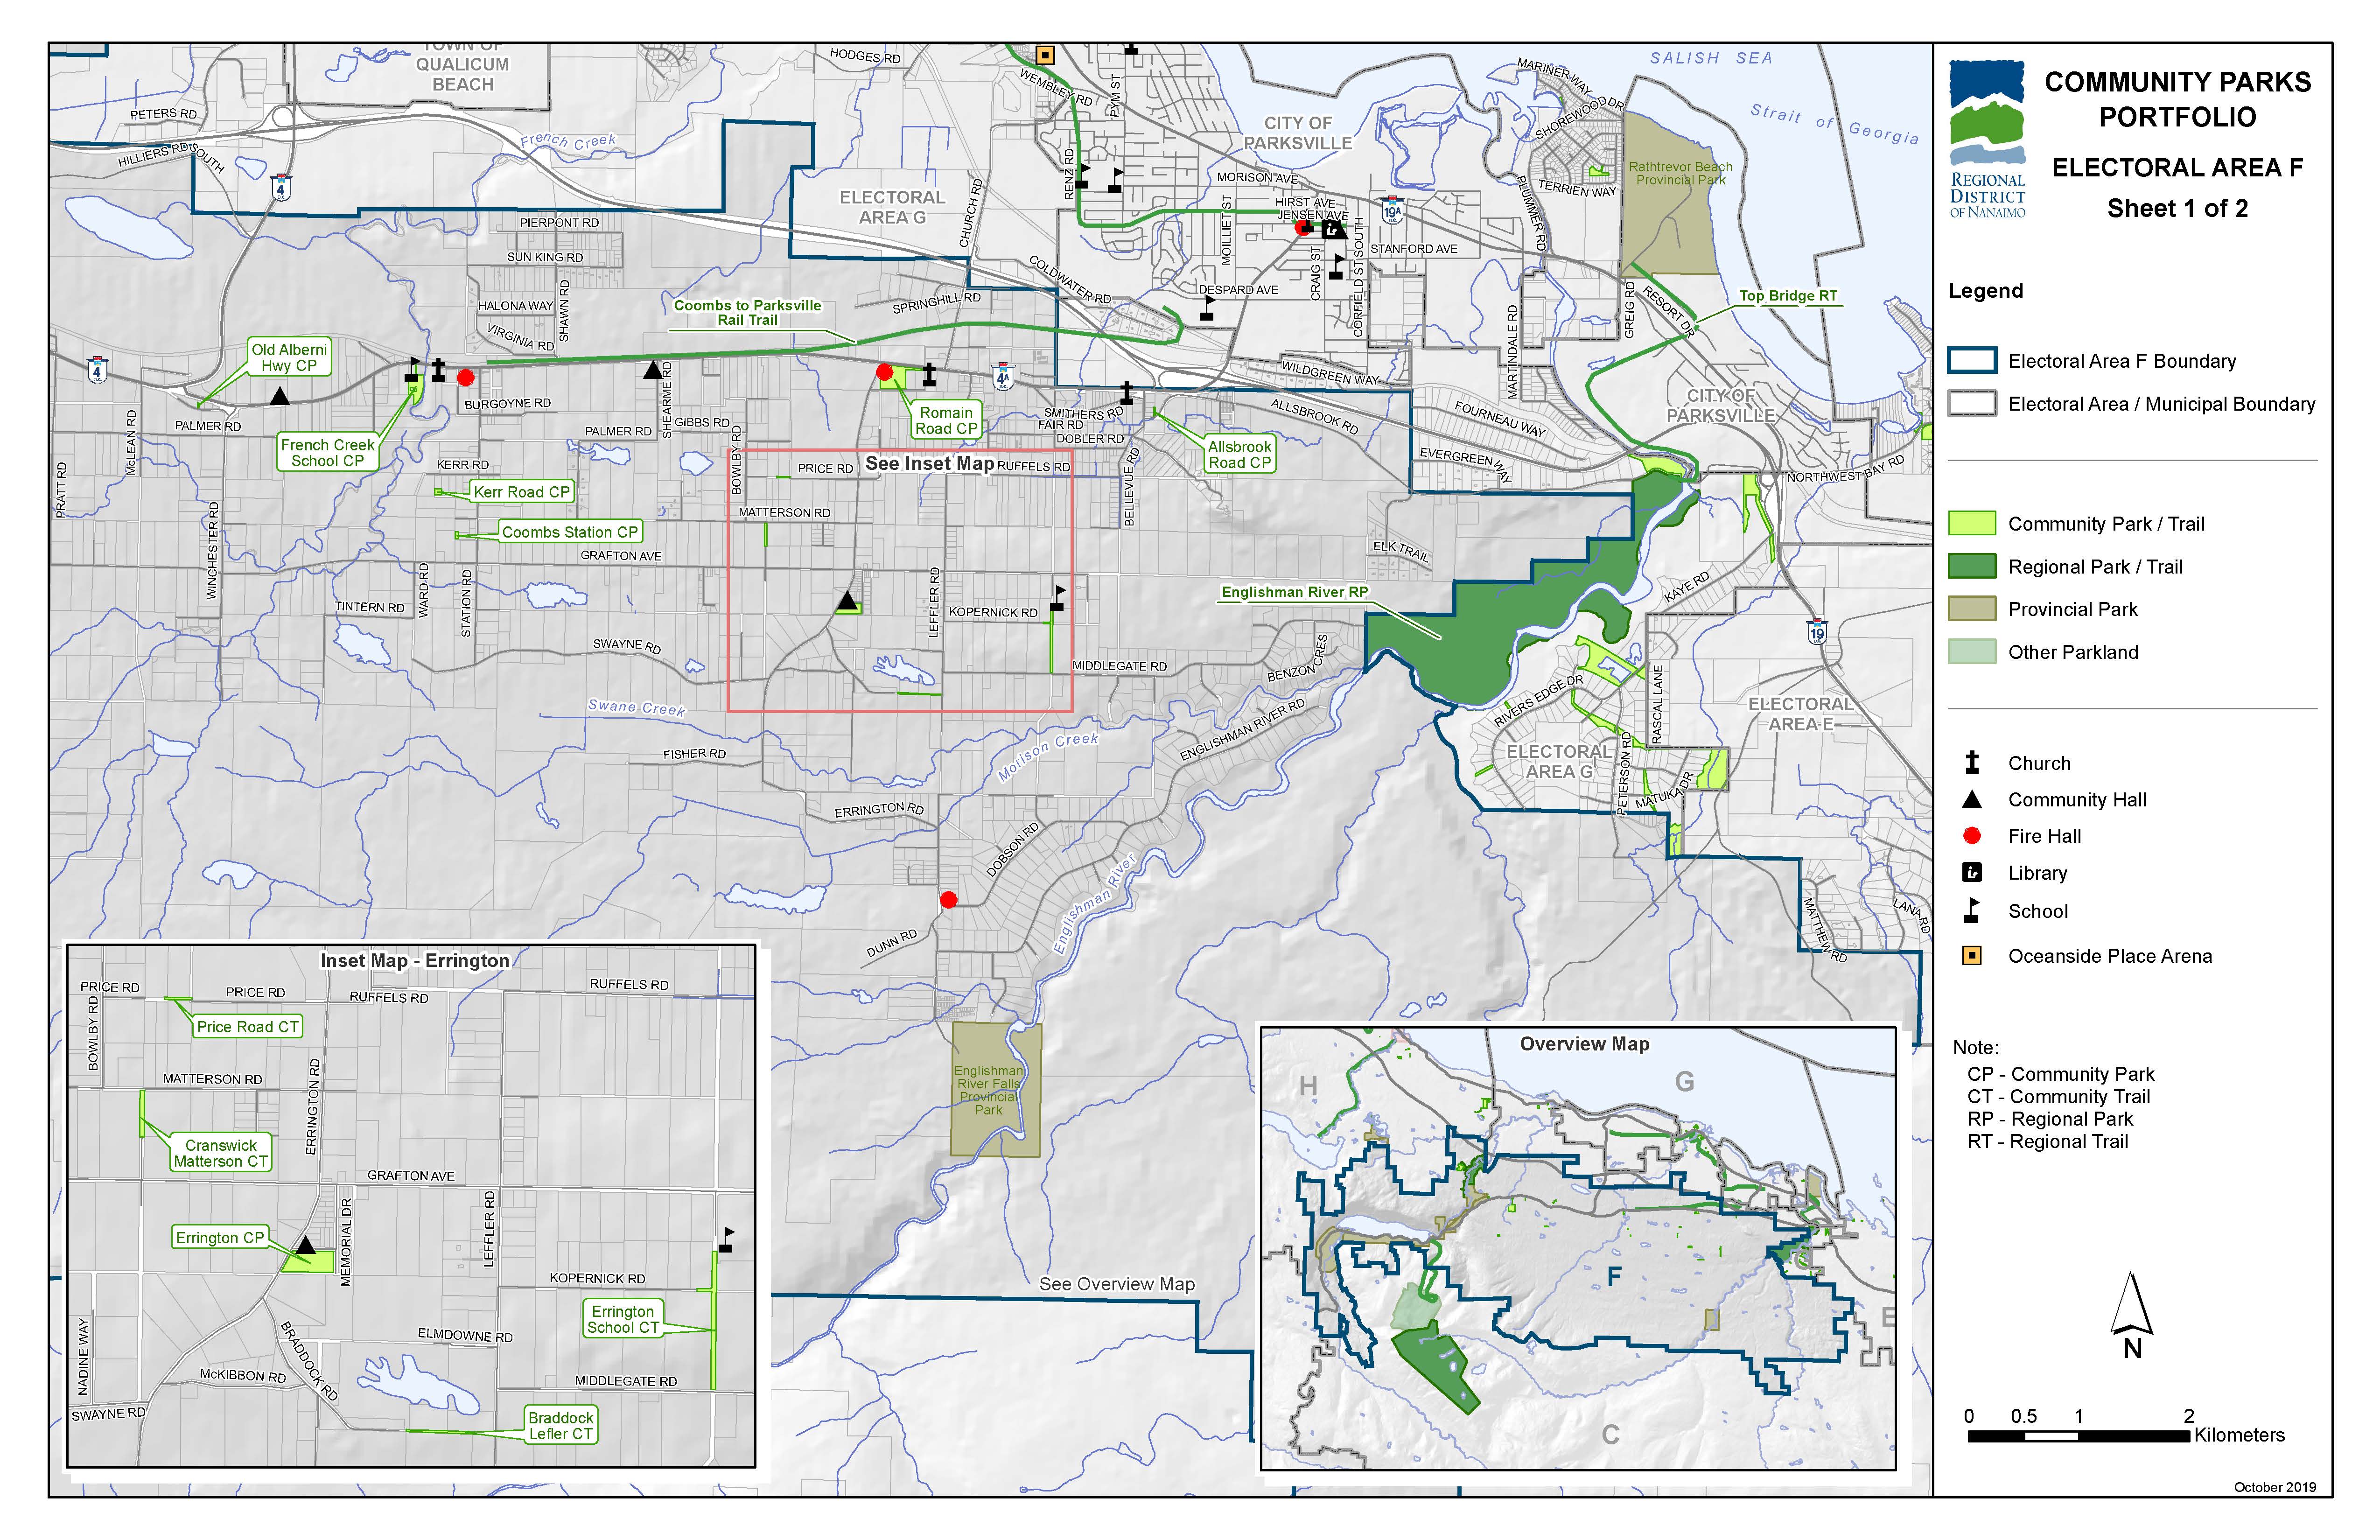 Community Parks and Trails for Area F (East)